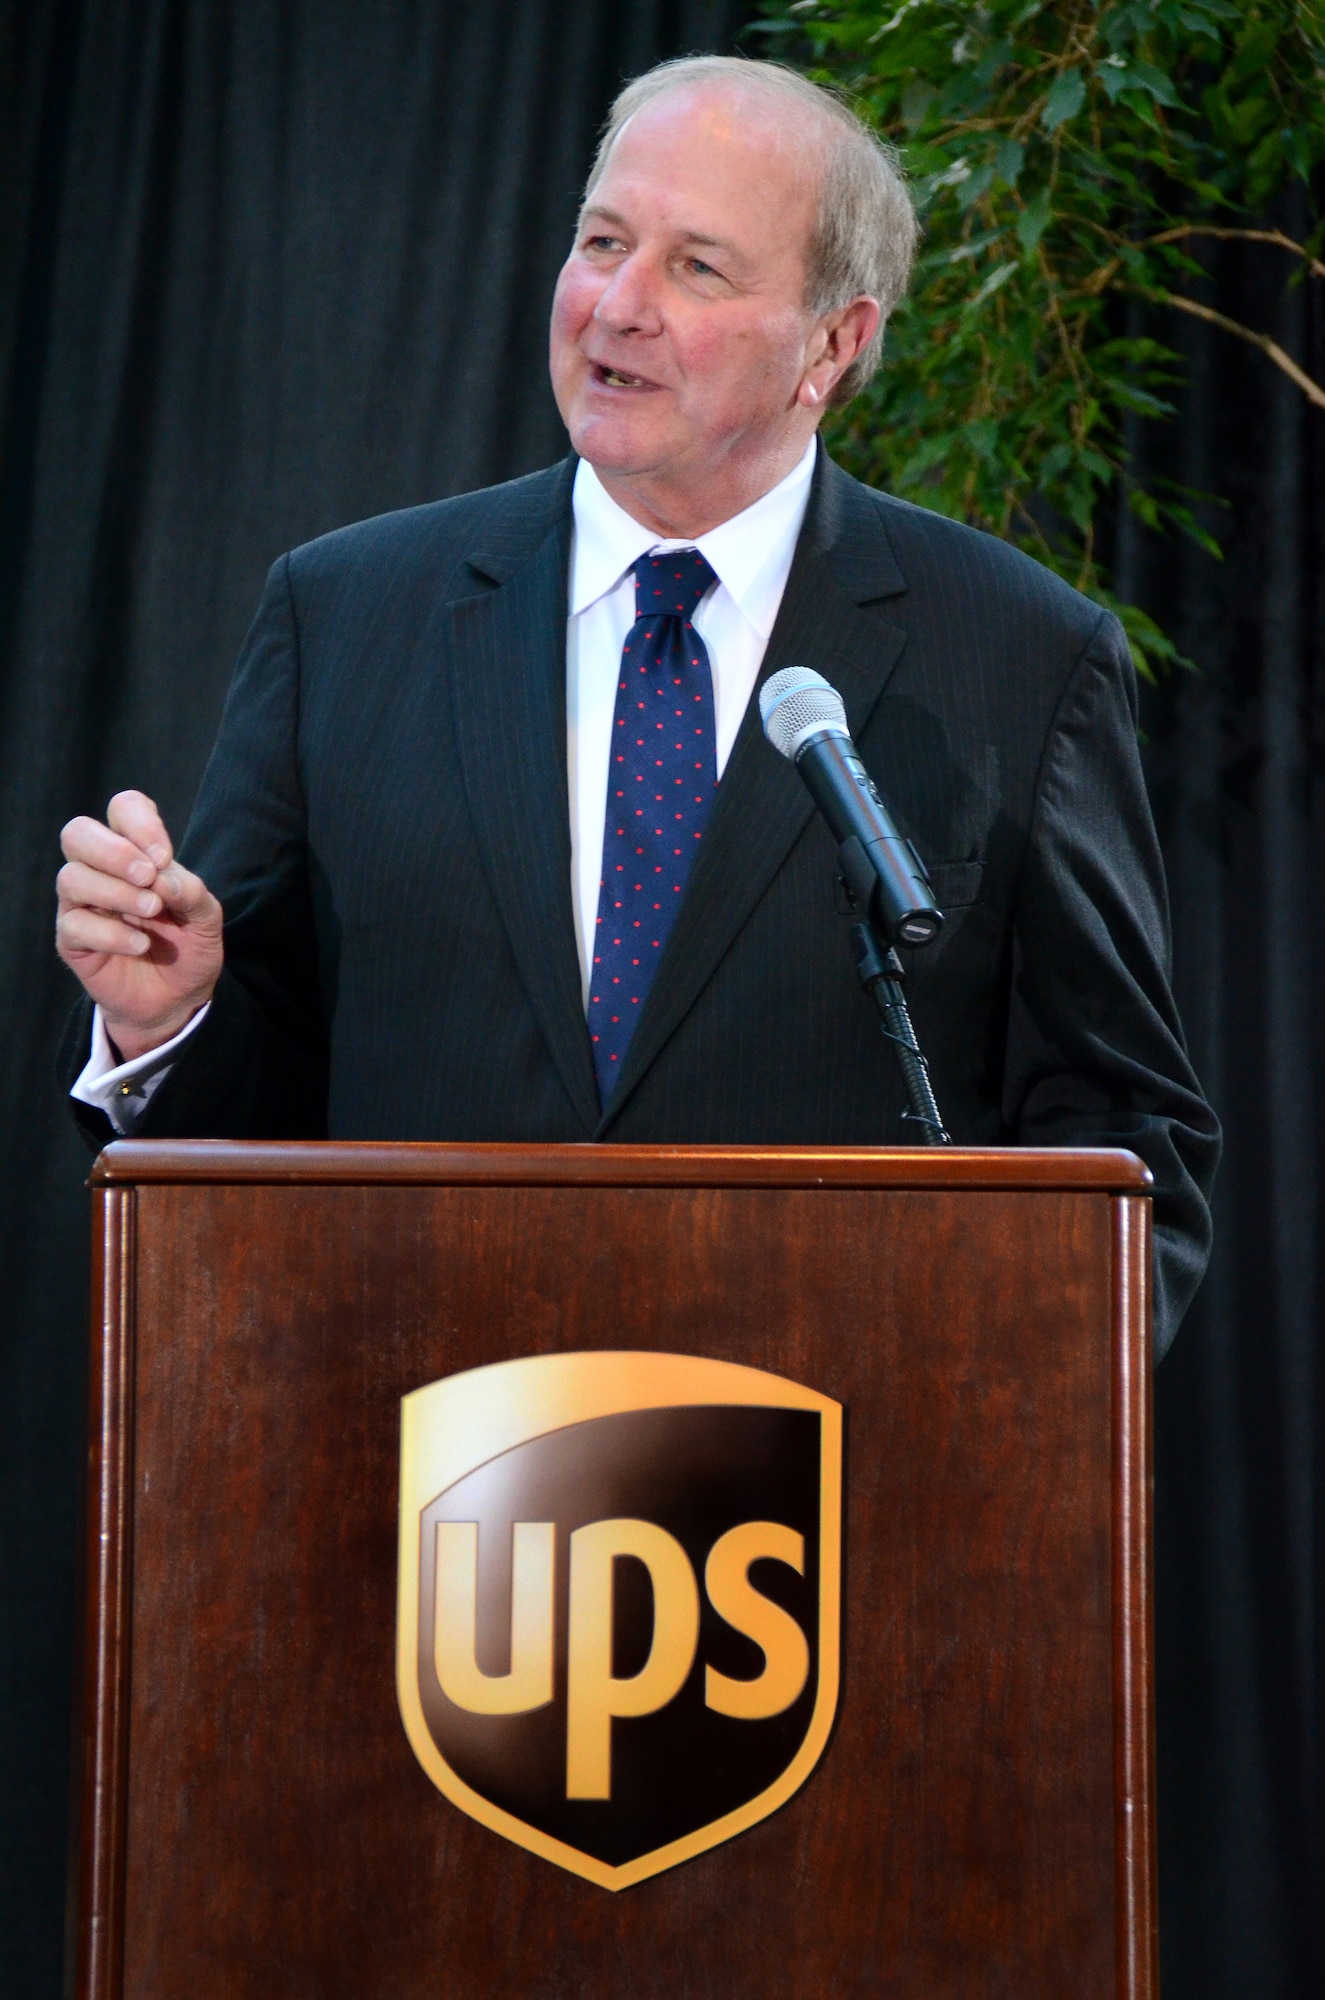 James Rebholz, Employer Support of the Guard and Reserve national chairman, speaks at the ceremony highlighting the statement of support from United Parcel Service for the ESGR at the UPS world headquarters, Atlanta, Ga., Feb. 12.  The signing ceremony represents the support UPS provides to the over 23,000 employees who have served or are now serving in the armed forces of the United States.  (U.S. Air Force photo/ Brad Fallin)